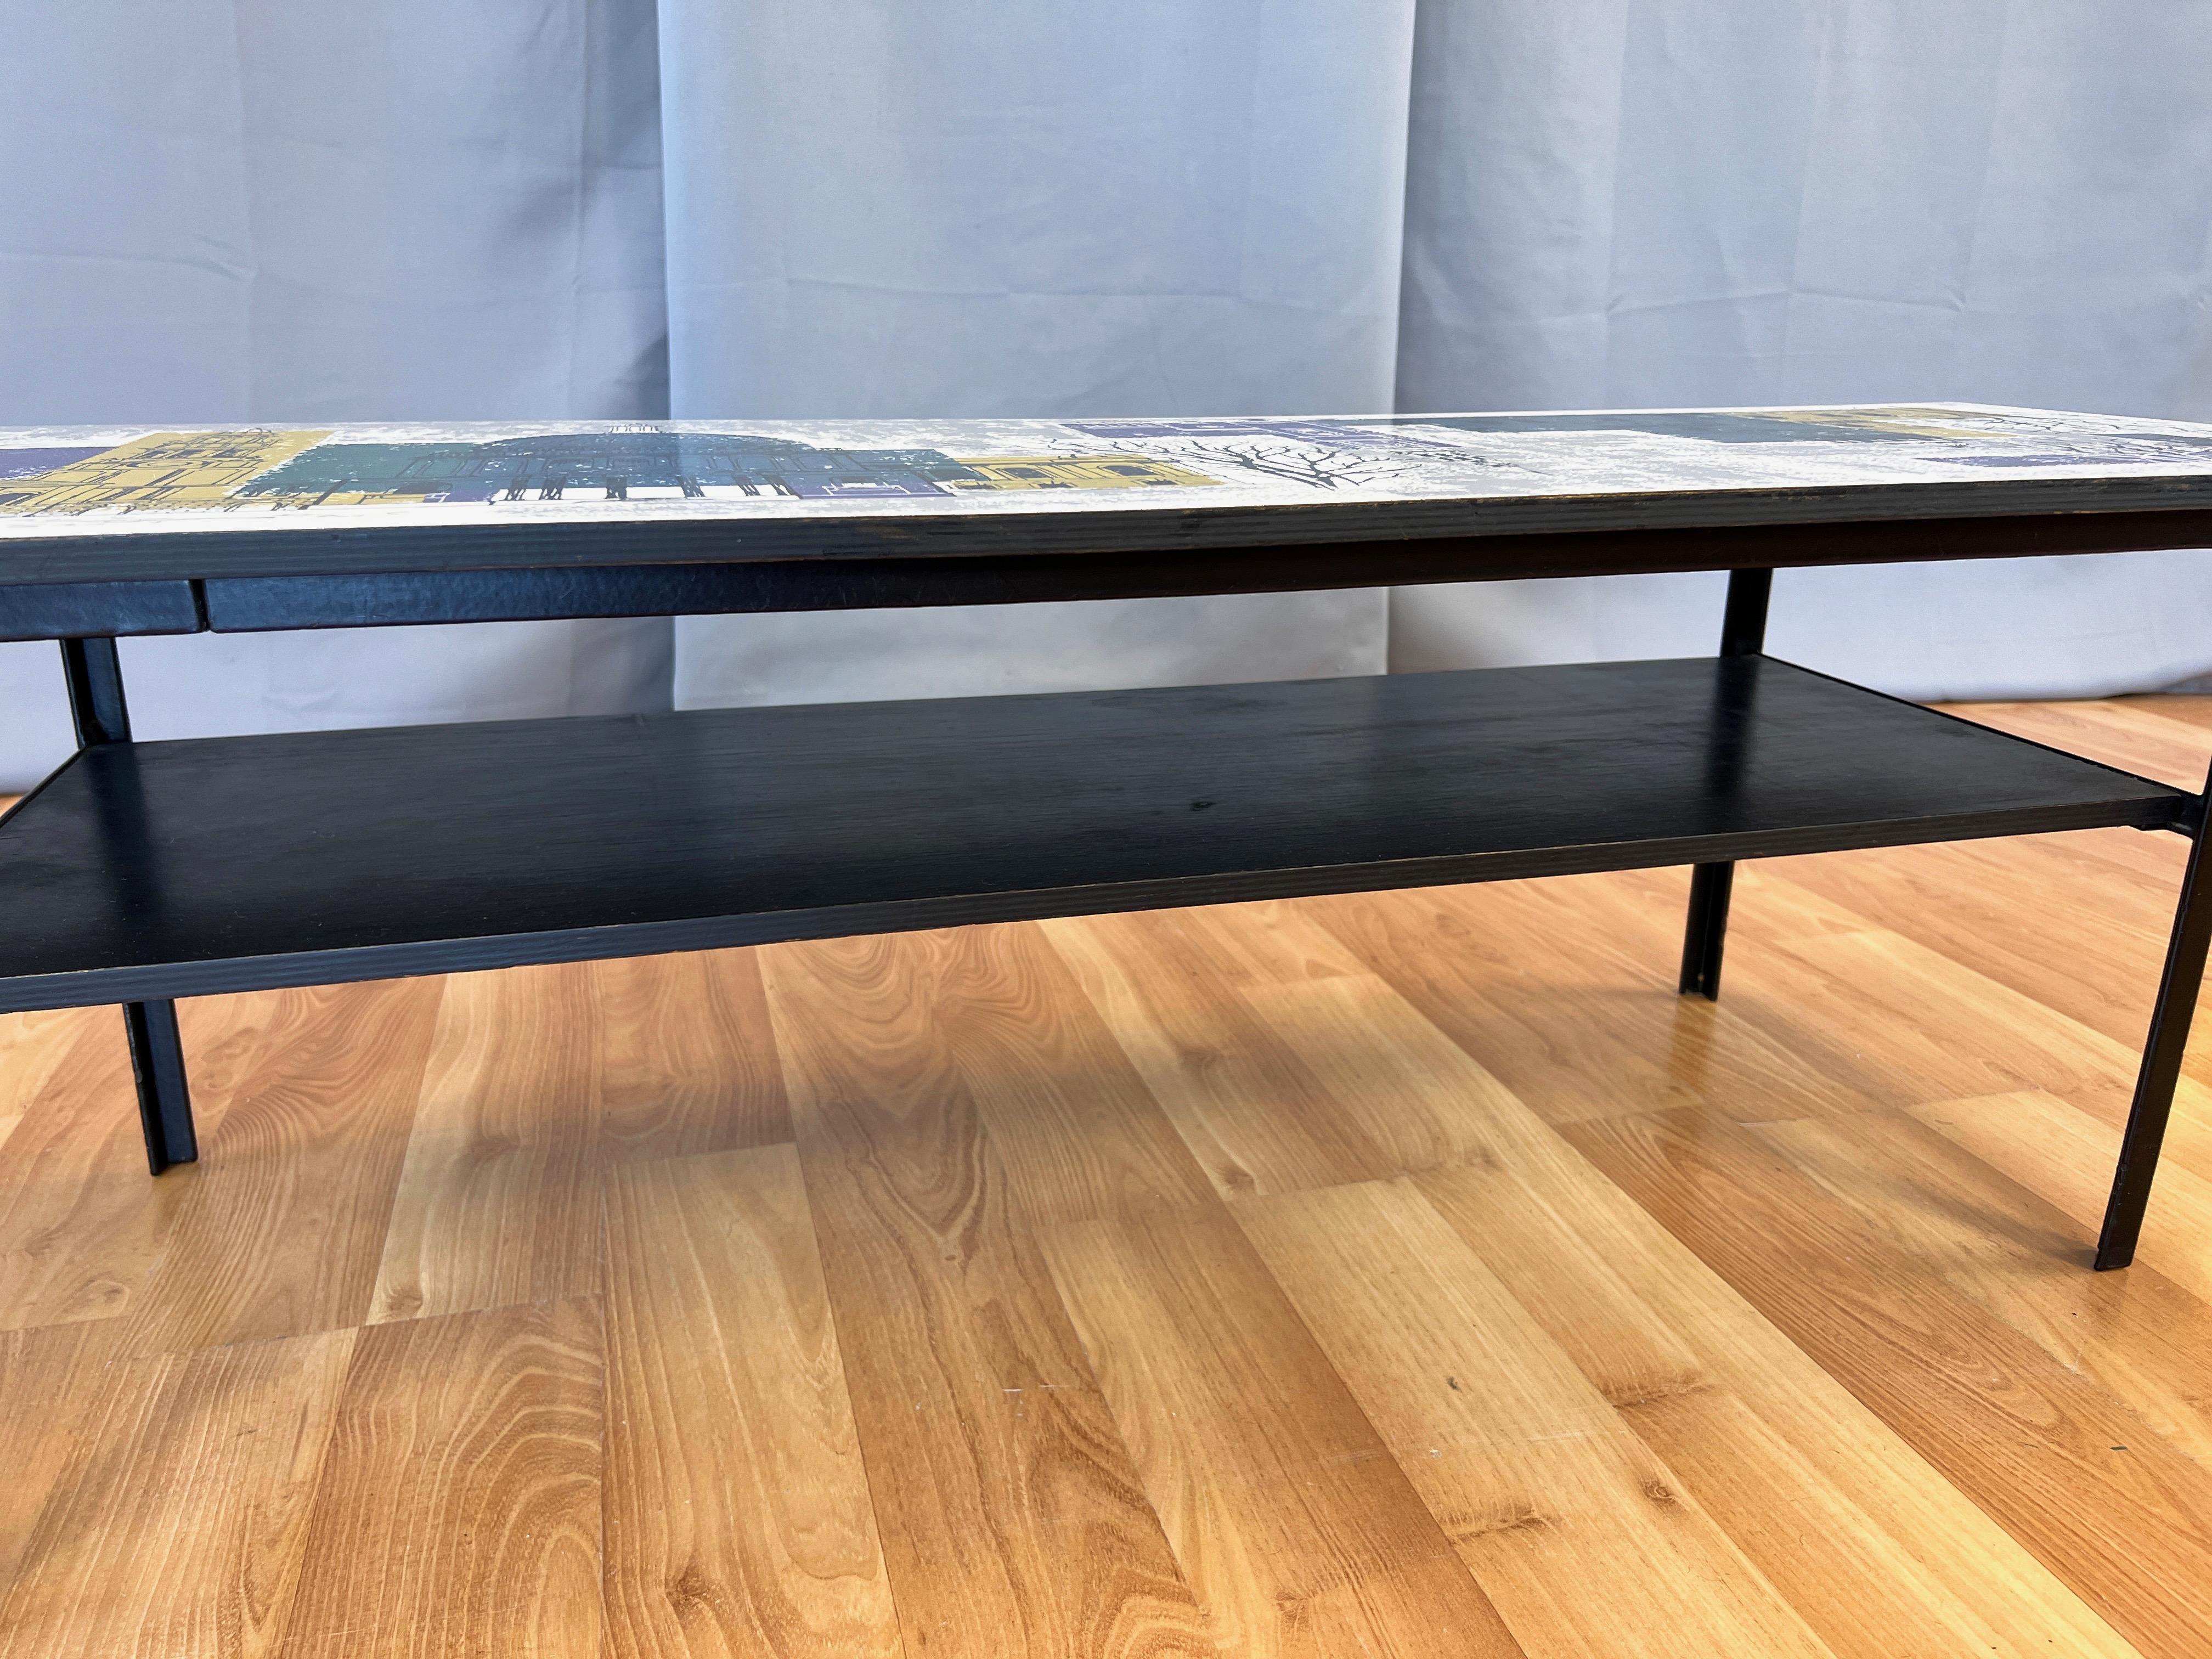 John Piper London Skyline Coffee Table by Myer for Conran and Heal’s, c. 1960 For Sale 2